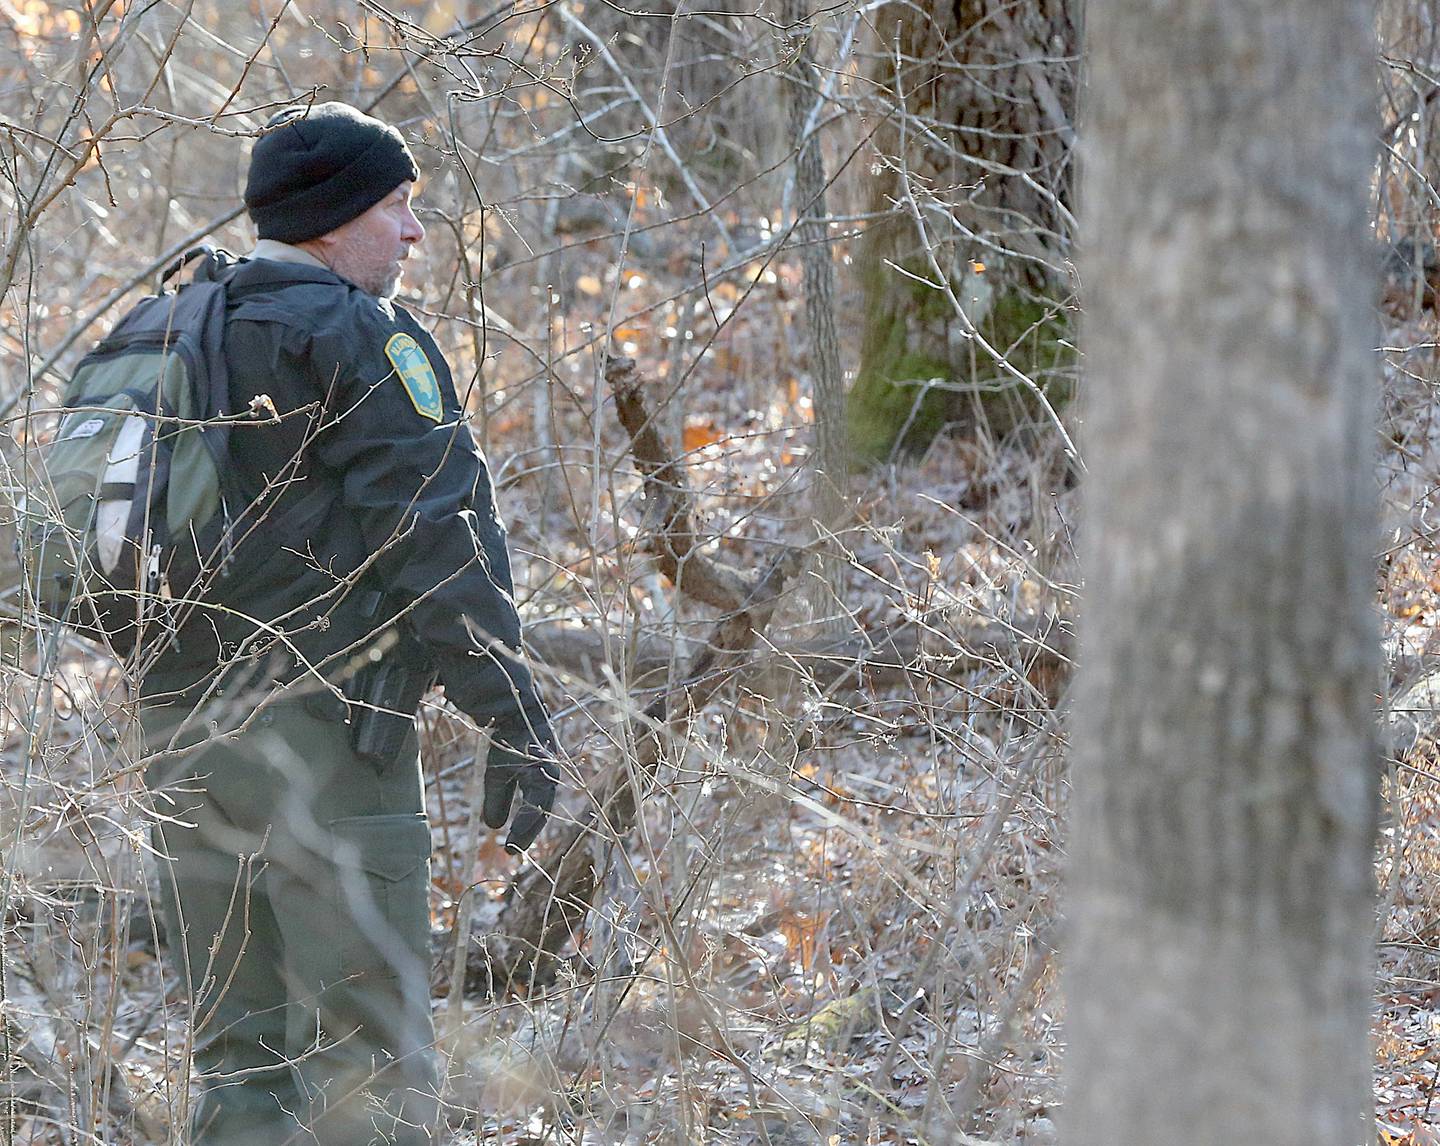 Conservation Police officer Joe Kaufman, leads a ground search off trail near French Canyon on Friday, Jan. 17, 2020 at Starved Rock State Park. Conservation Police along with Utica and Oglesby fire departments were conducting the ground search to find Tina Donovon, a missing woman from Ottawa.